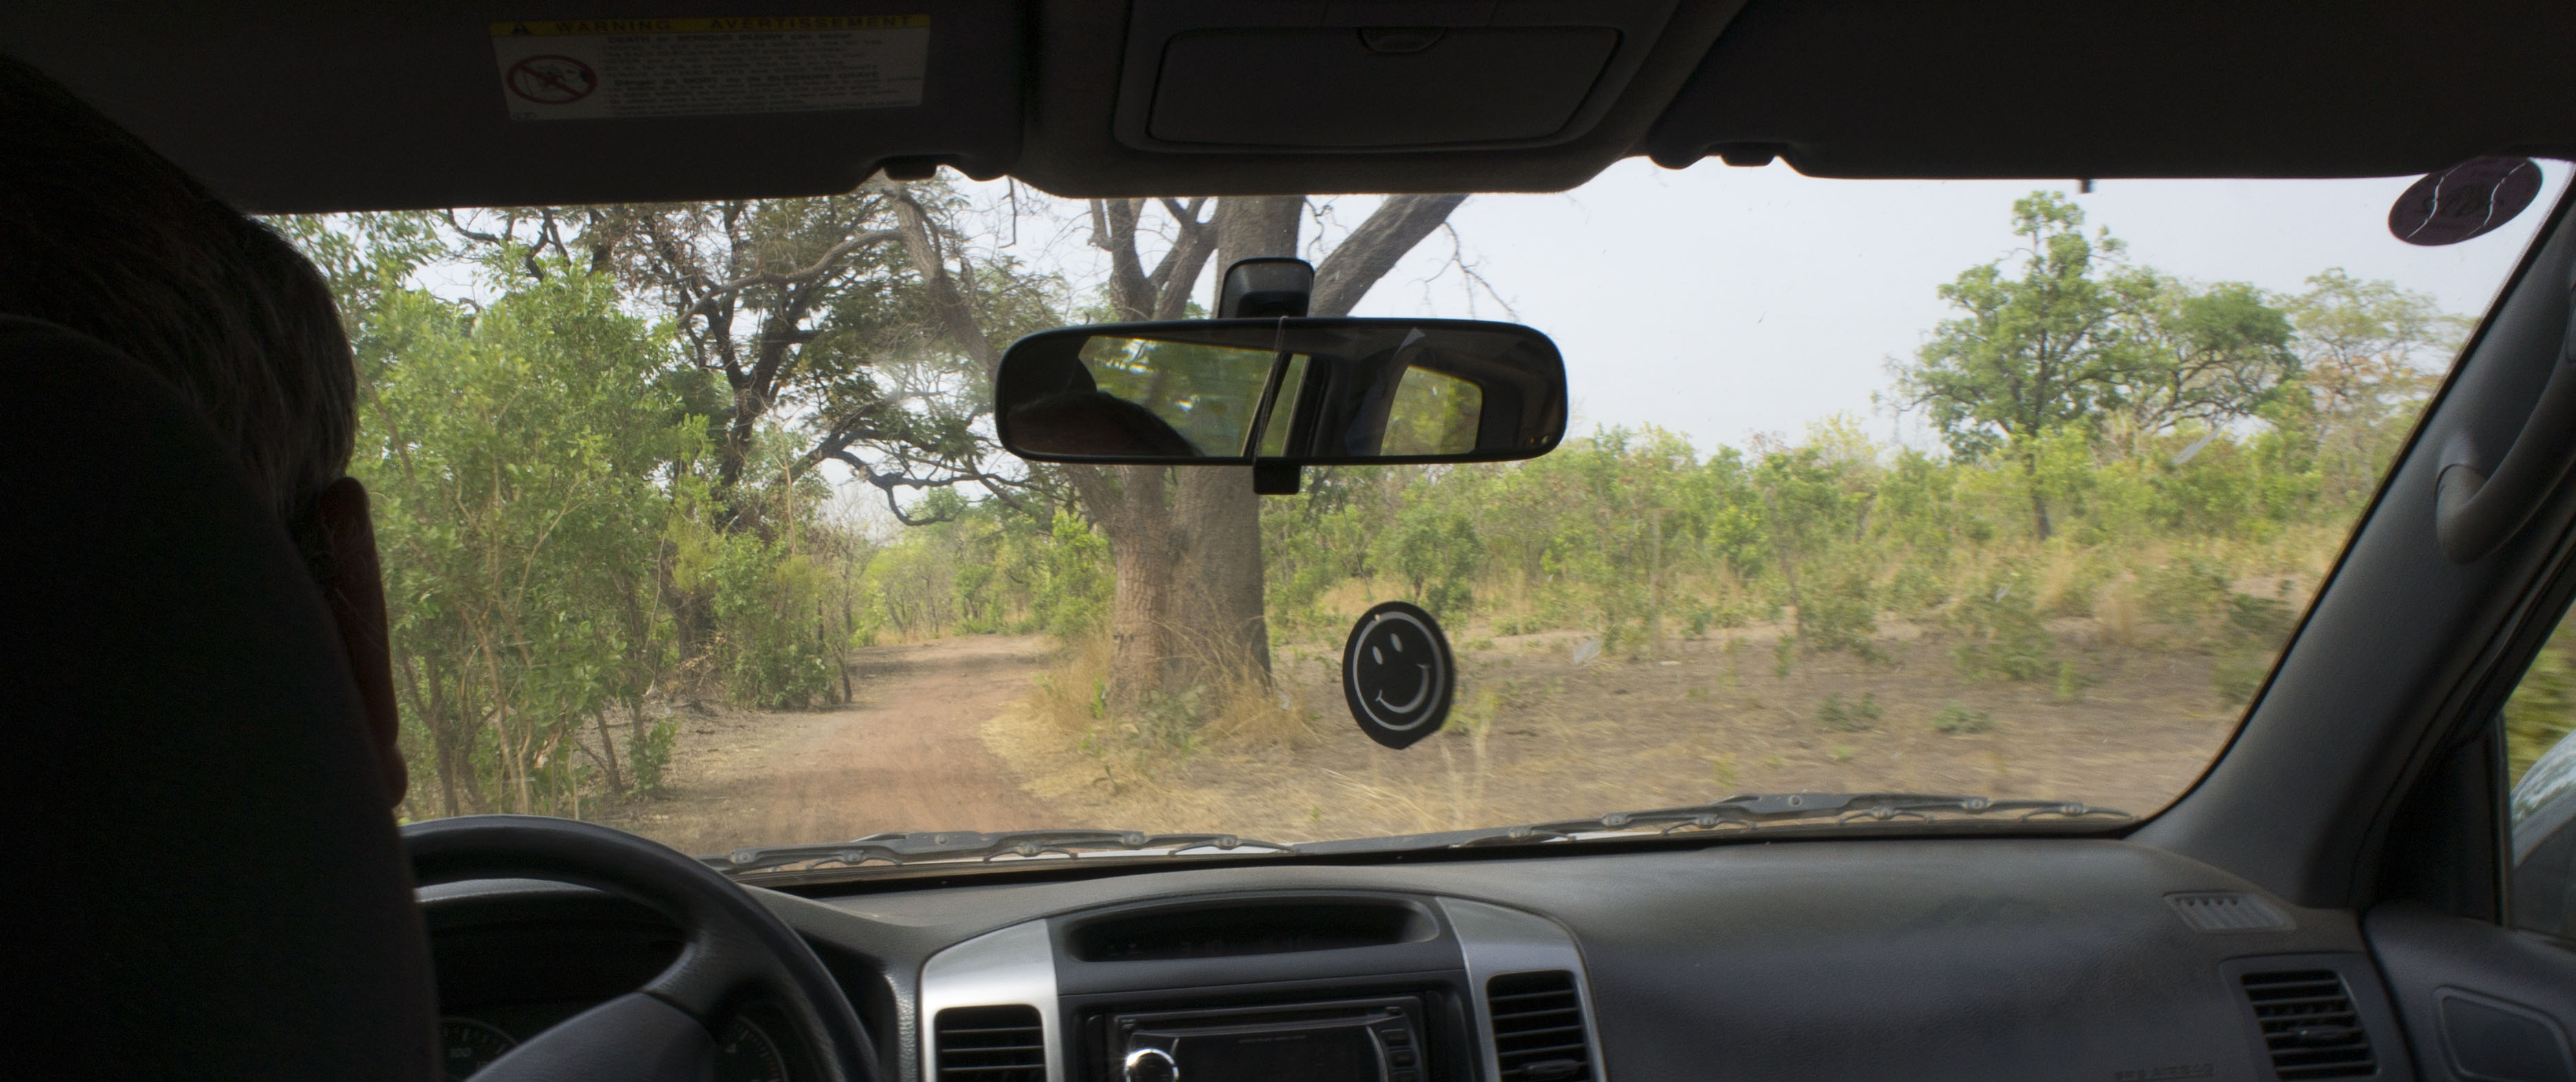 Road in Africa